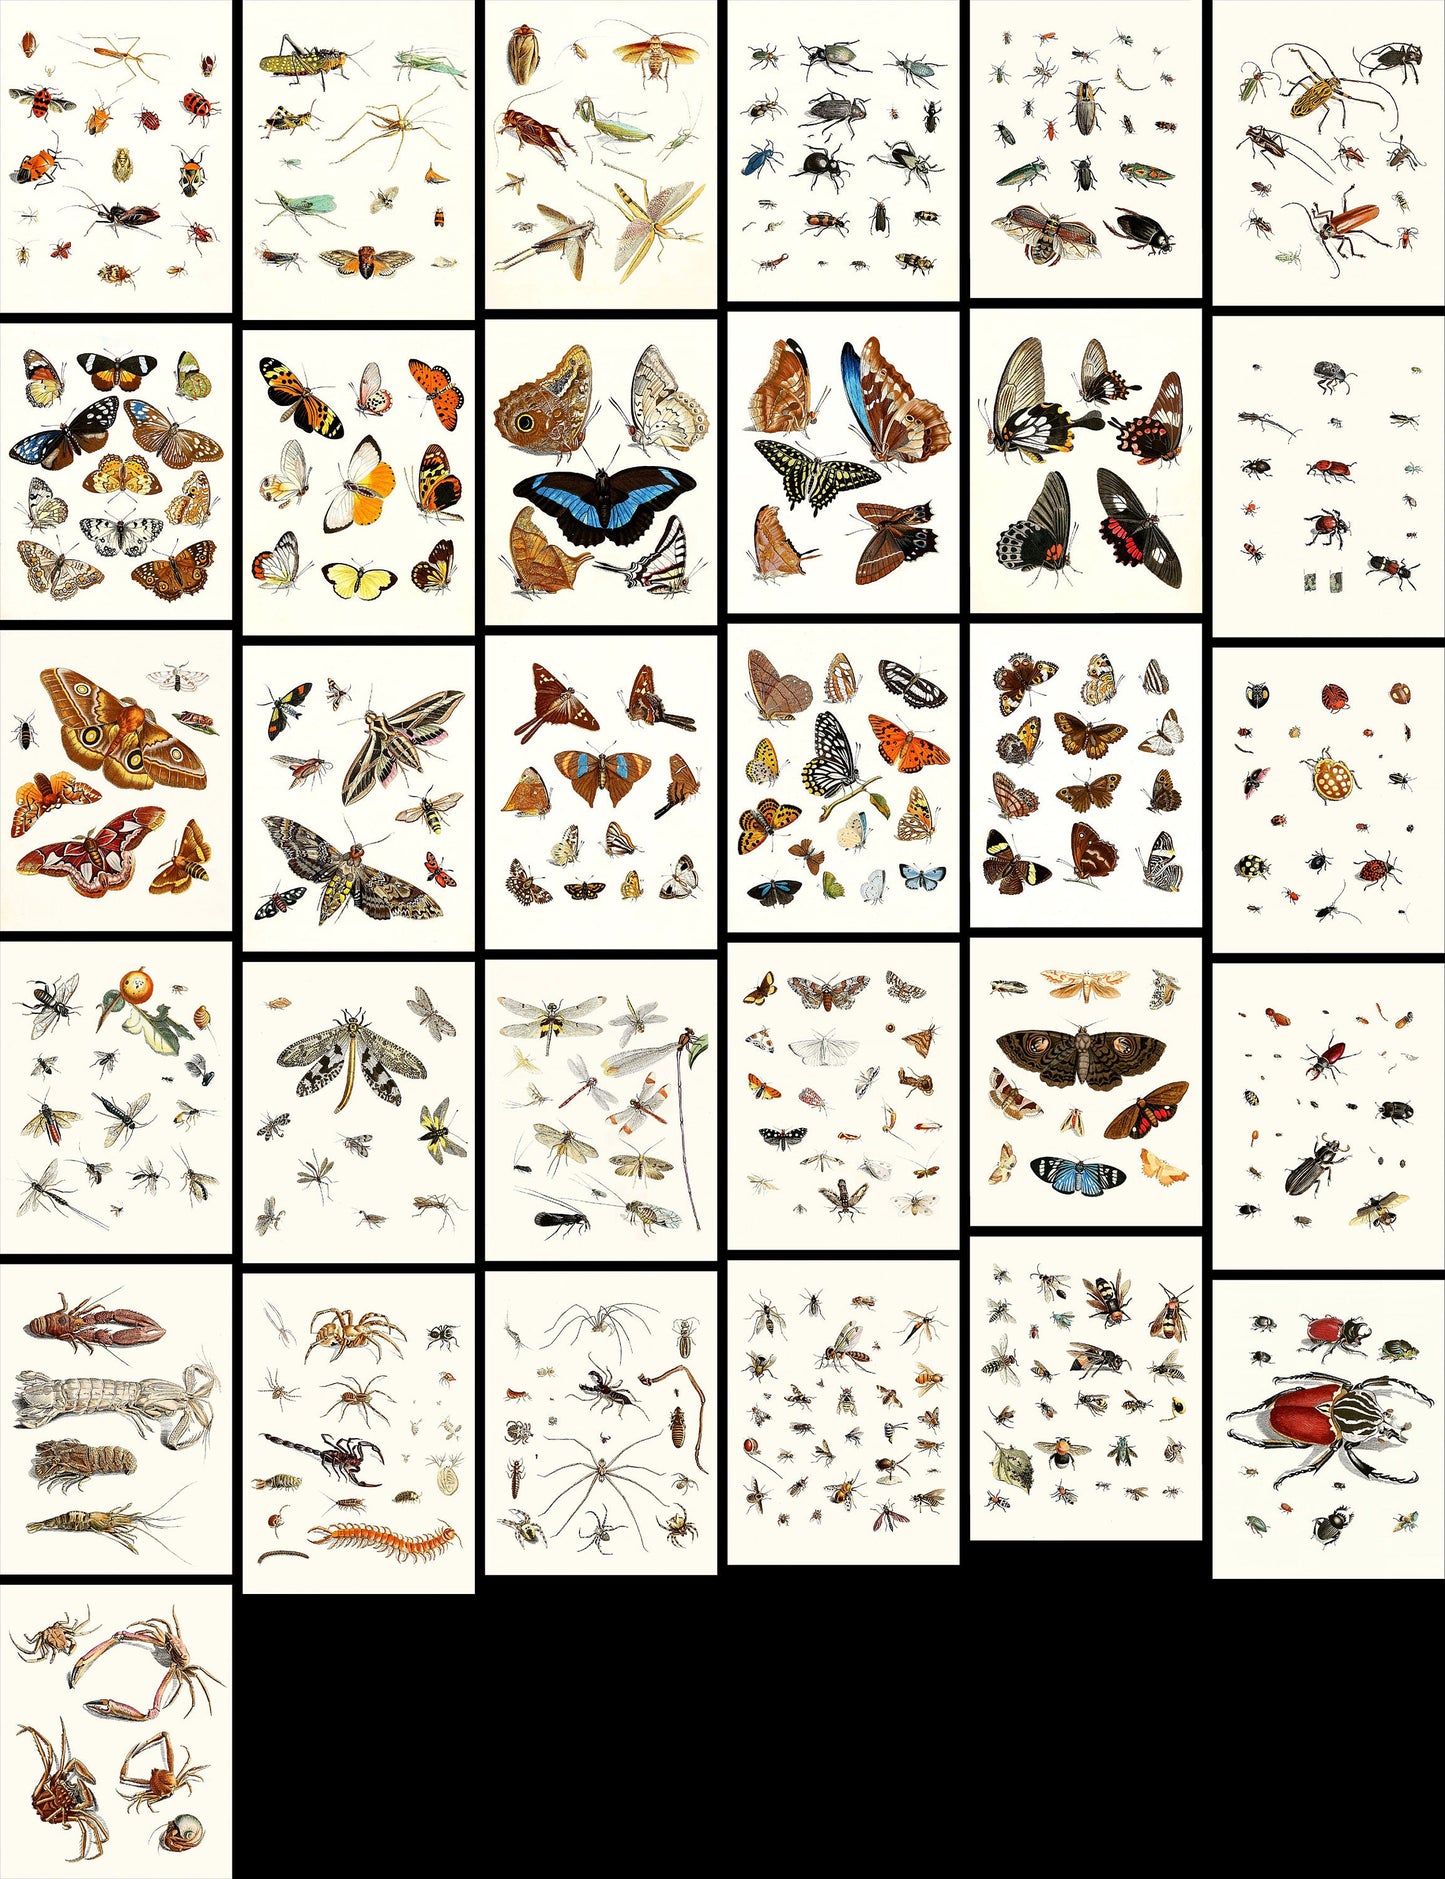 Dr. Sulzer's Short History of Insects [31 Images]